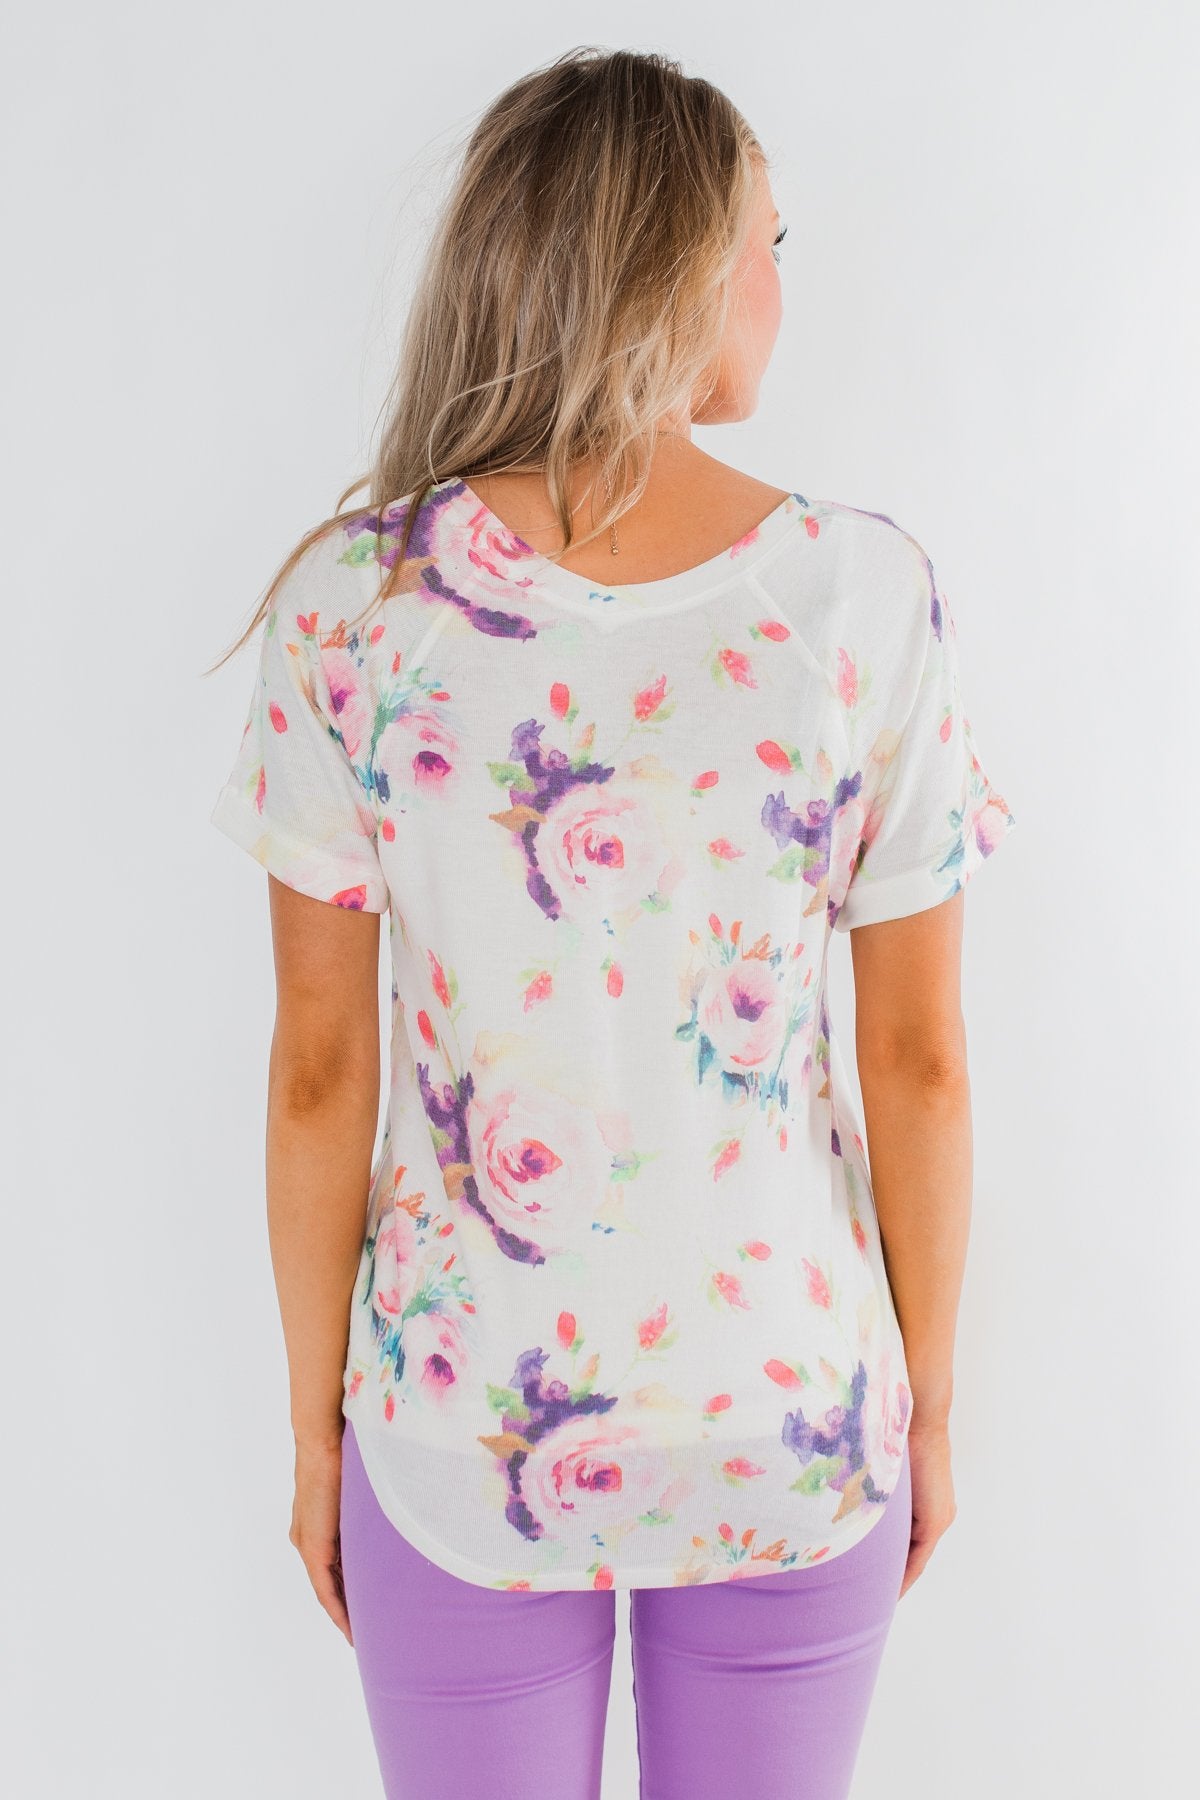 Make It Special Floral V-Neck Top- White – The Pulse Boutique